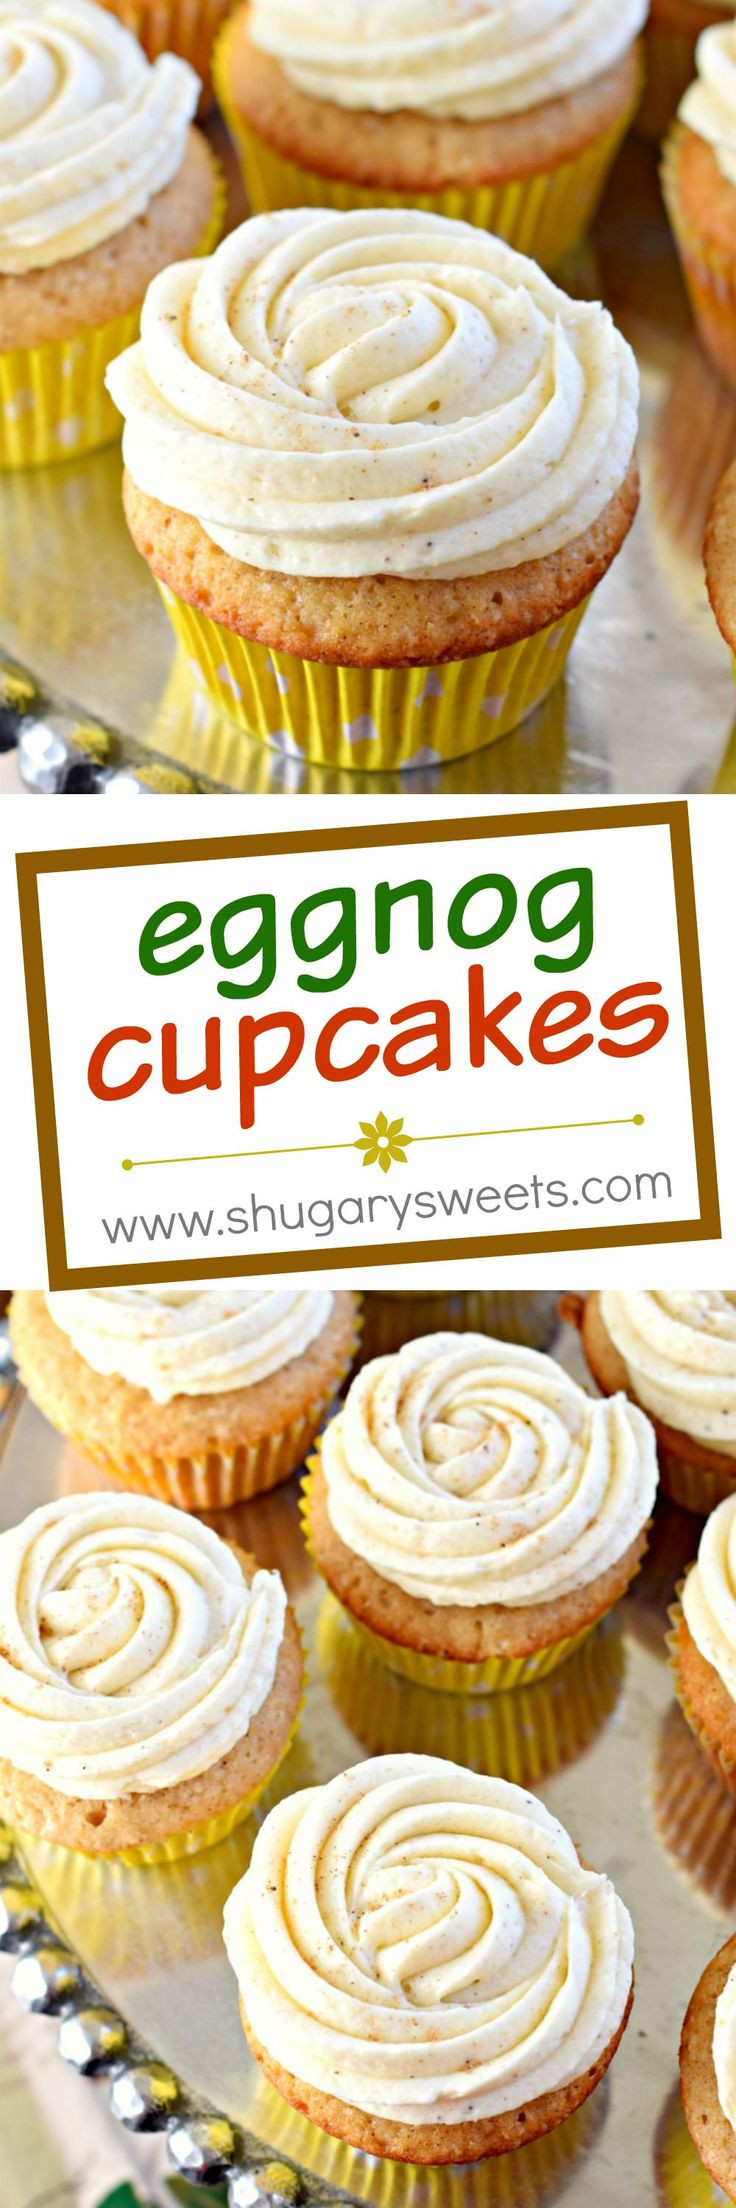 Eggnog Pound Cake Recipes From Scratch
 774 best images about Cakes and Cupcakes on Pinterest